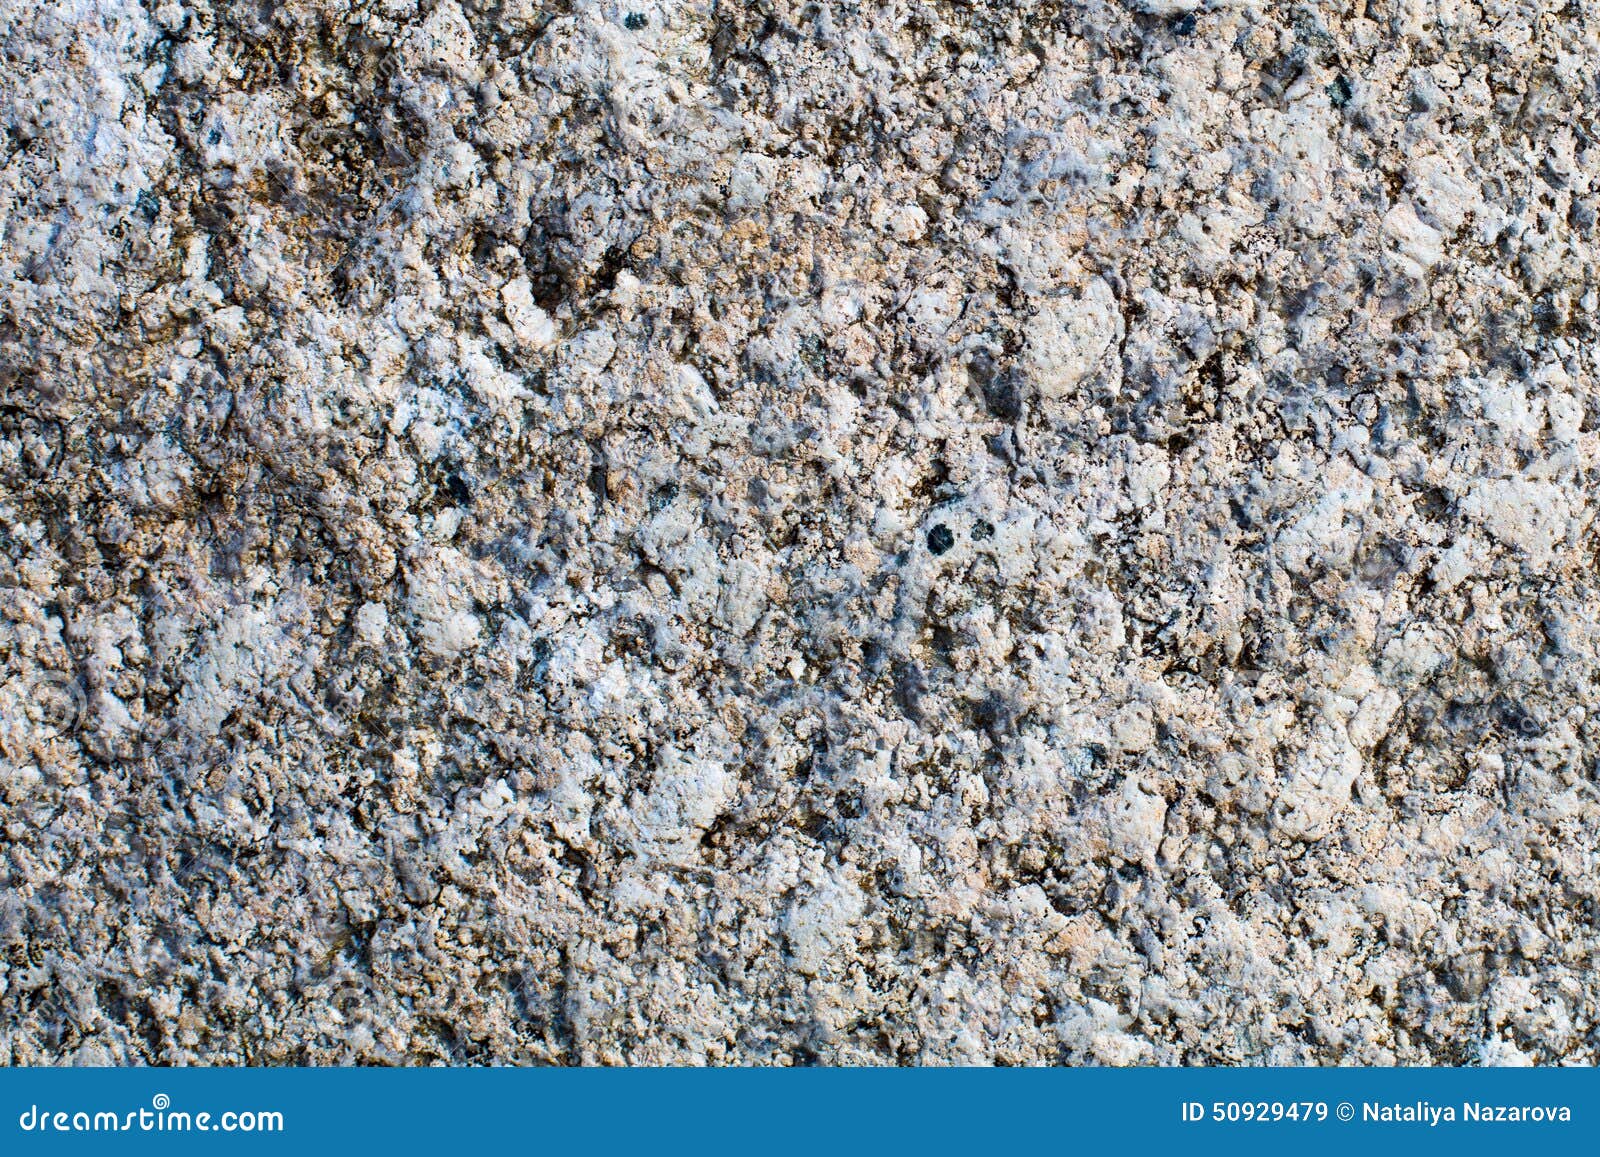 seamless mty rock texture background